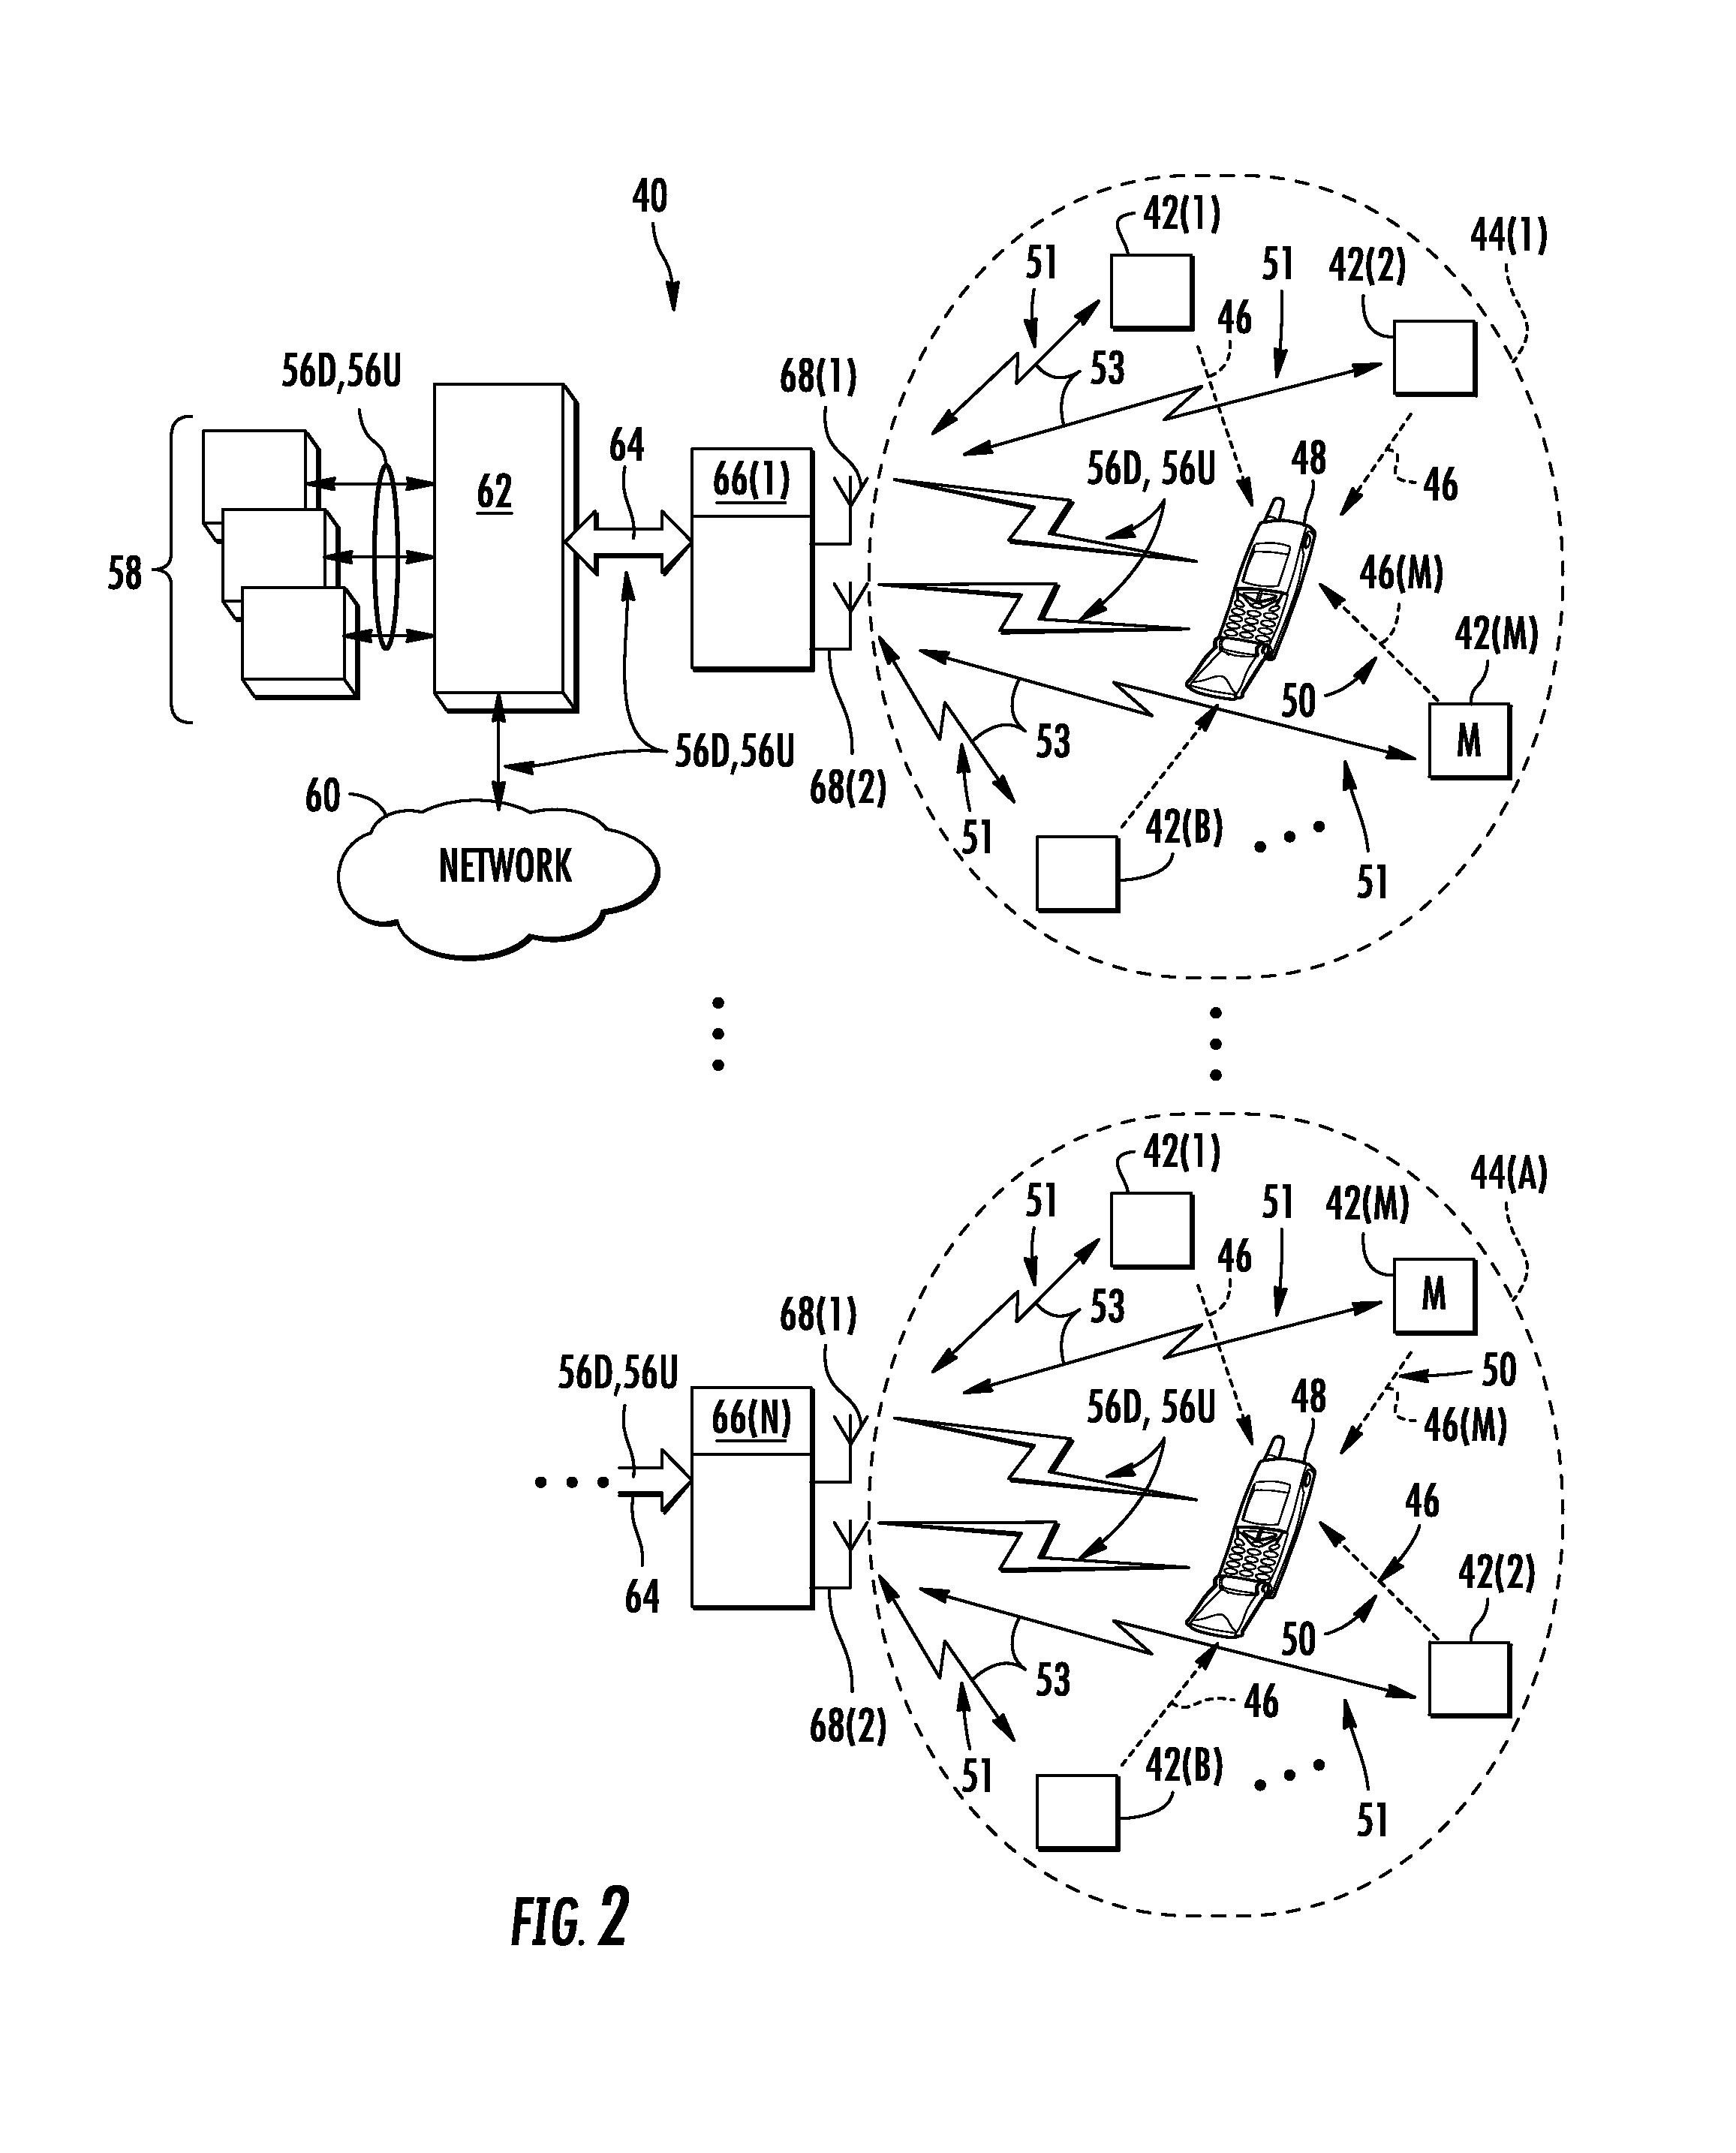 Ultrasound-based localization of client devices in distributed communication systems, and related devices, systems, and methods